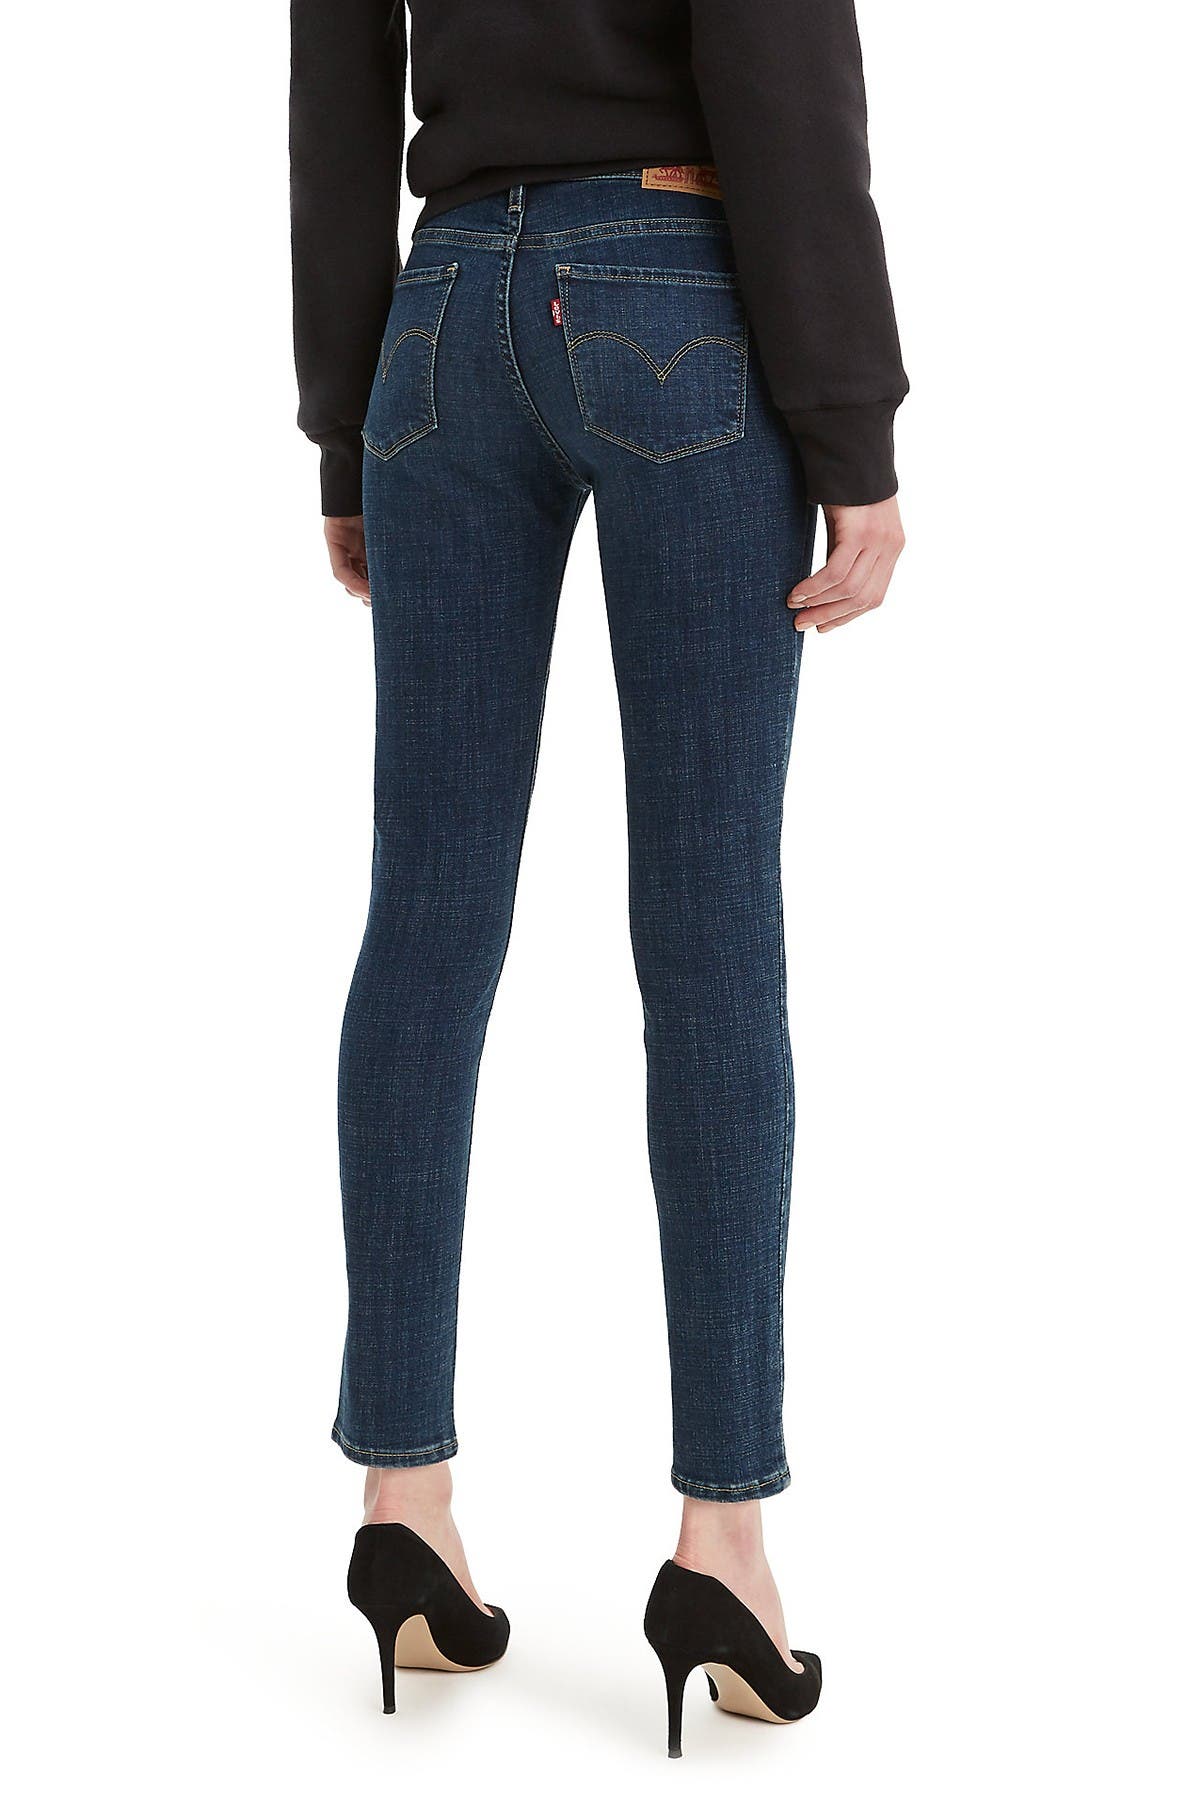 711 skinny ankle jeans